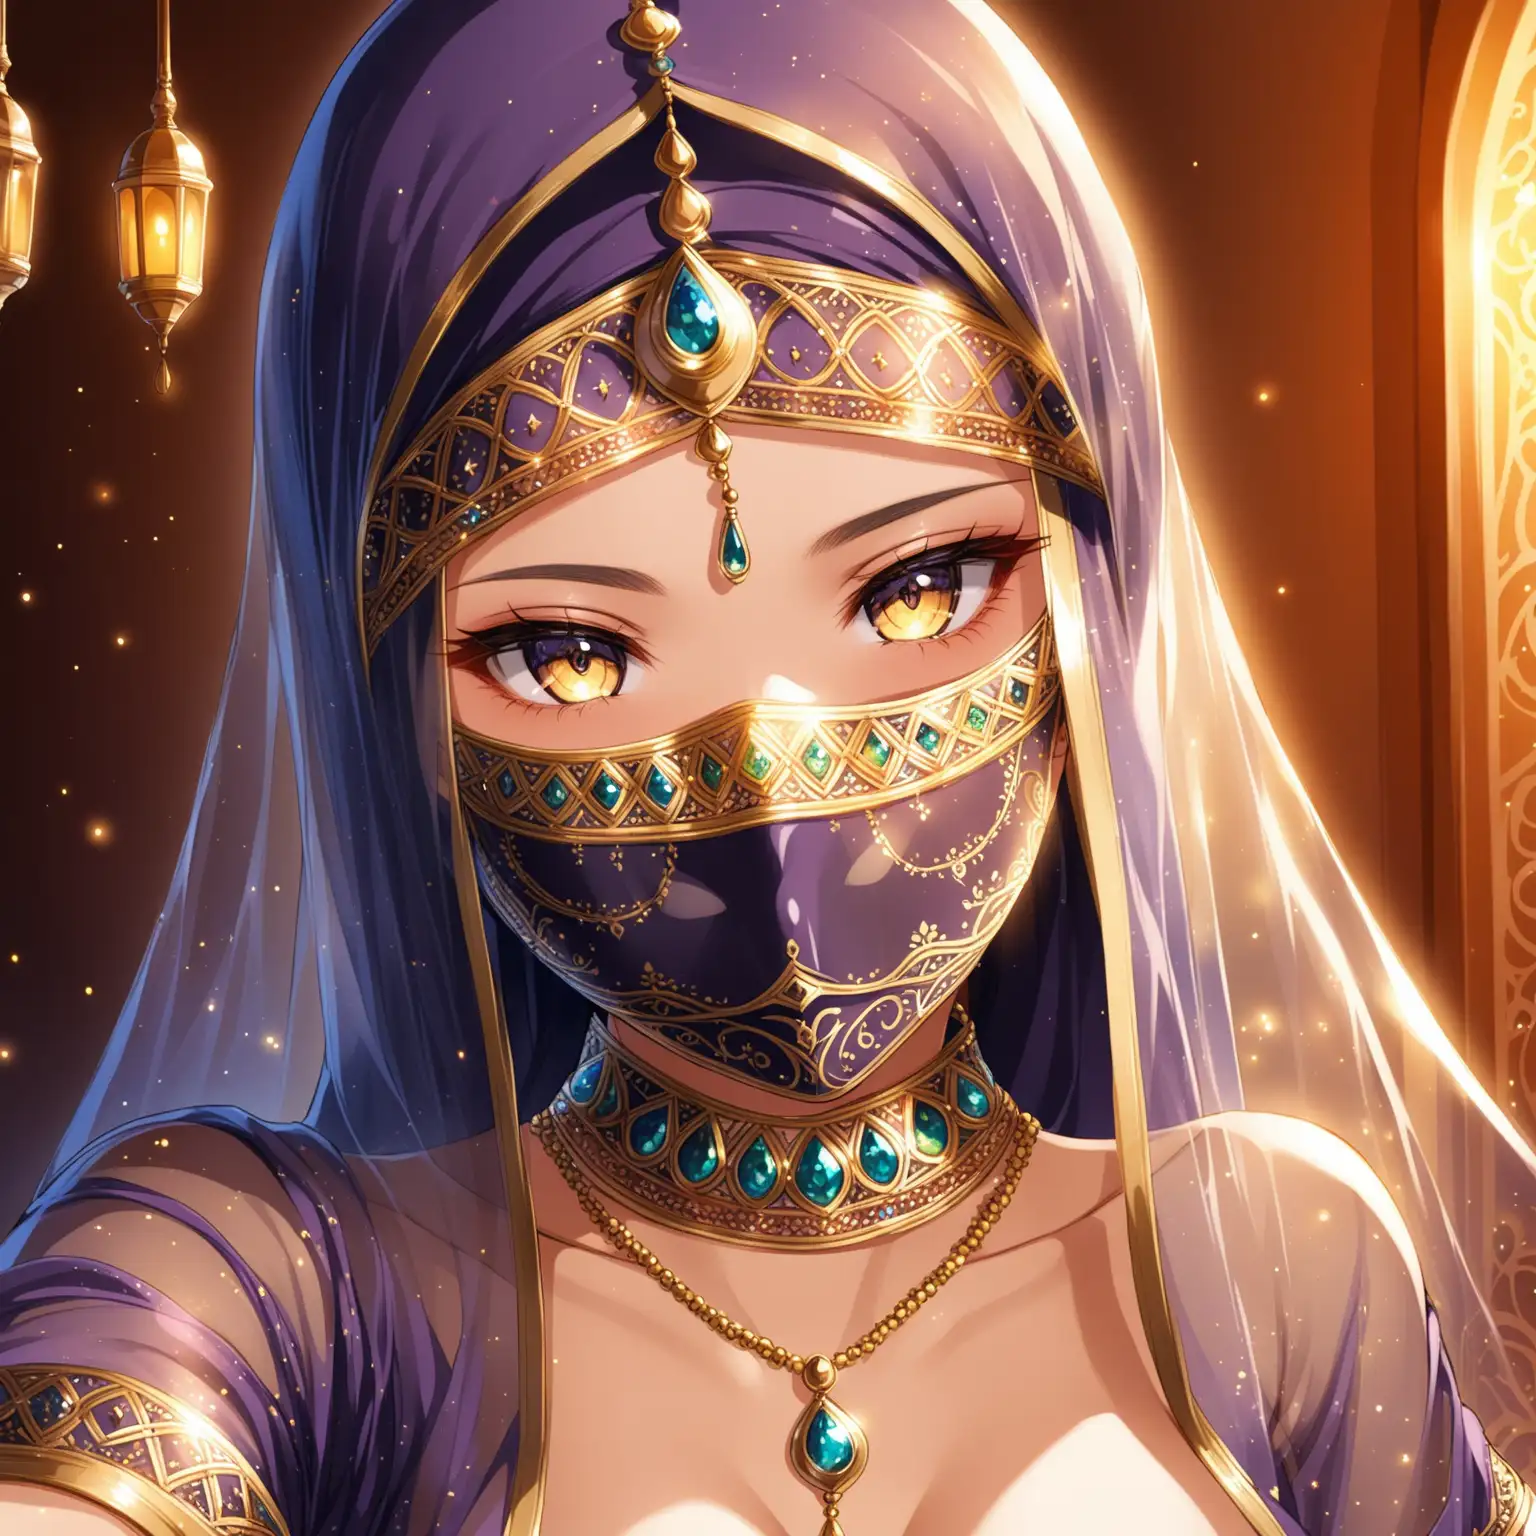 Sensual selfie picture of a hot anime girl, age 20, arabian nights outfits, transparent face veil mask